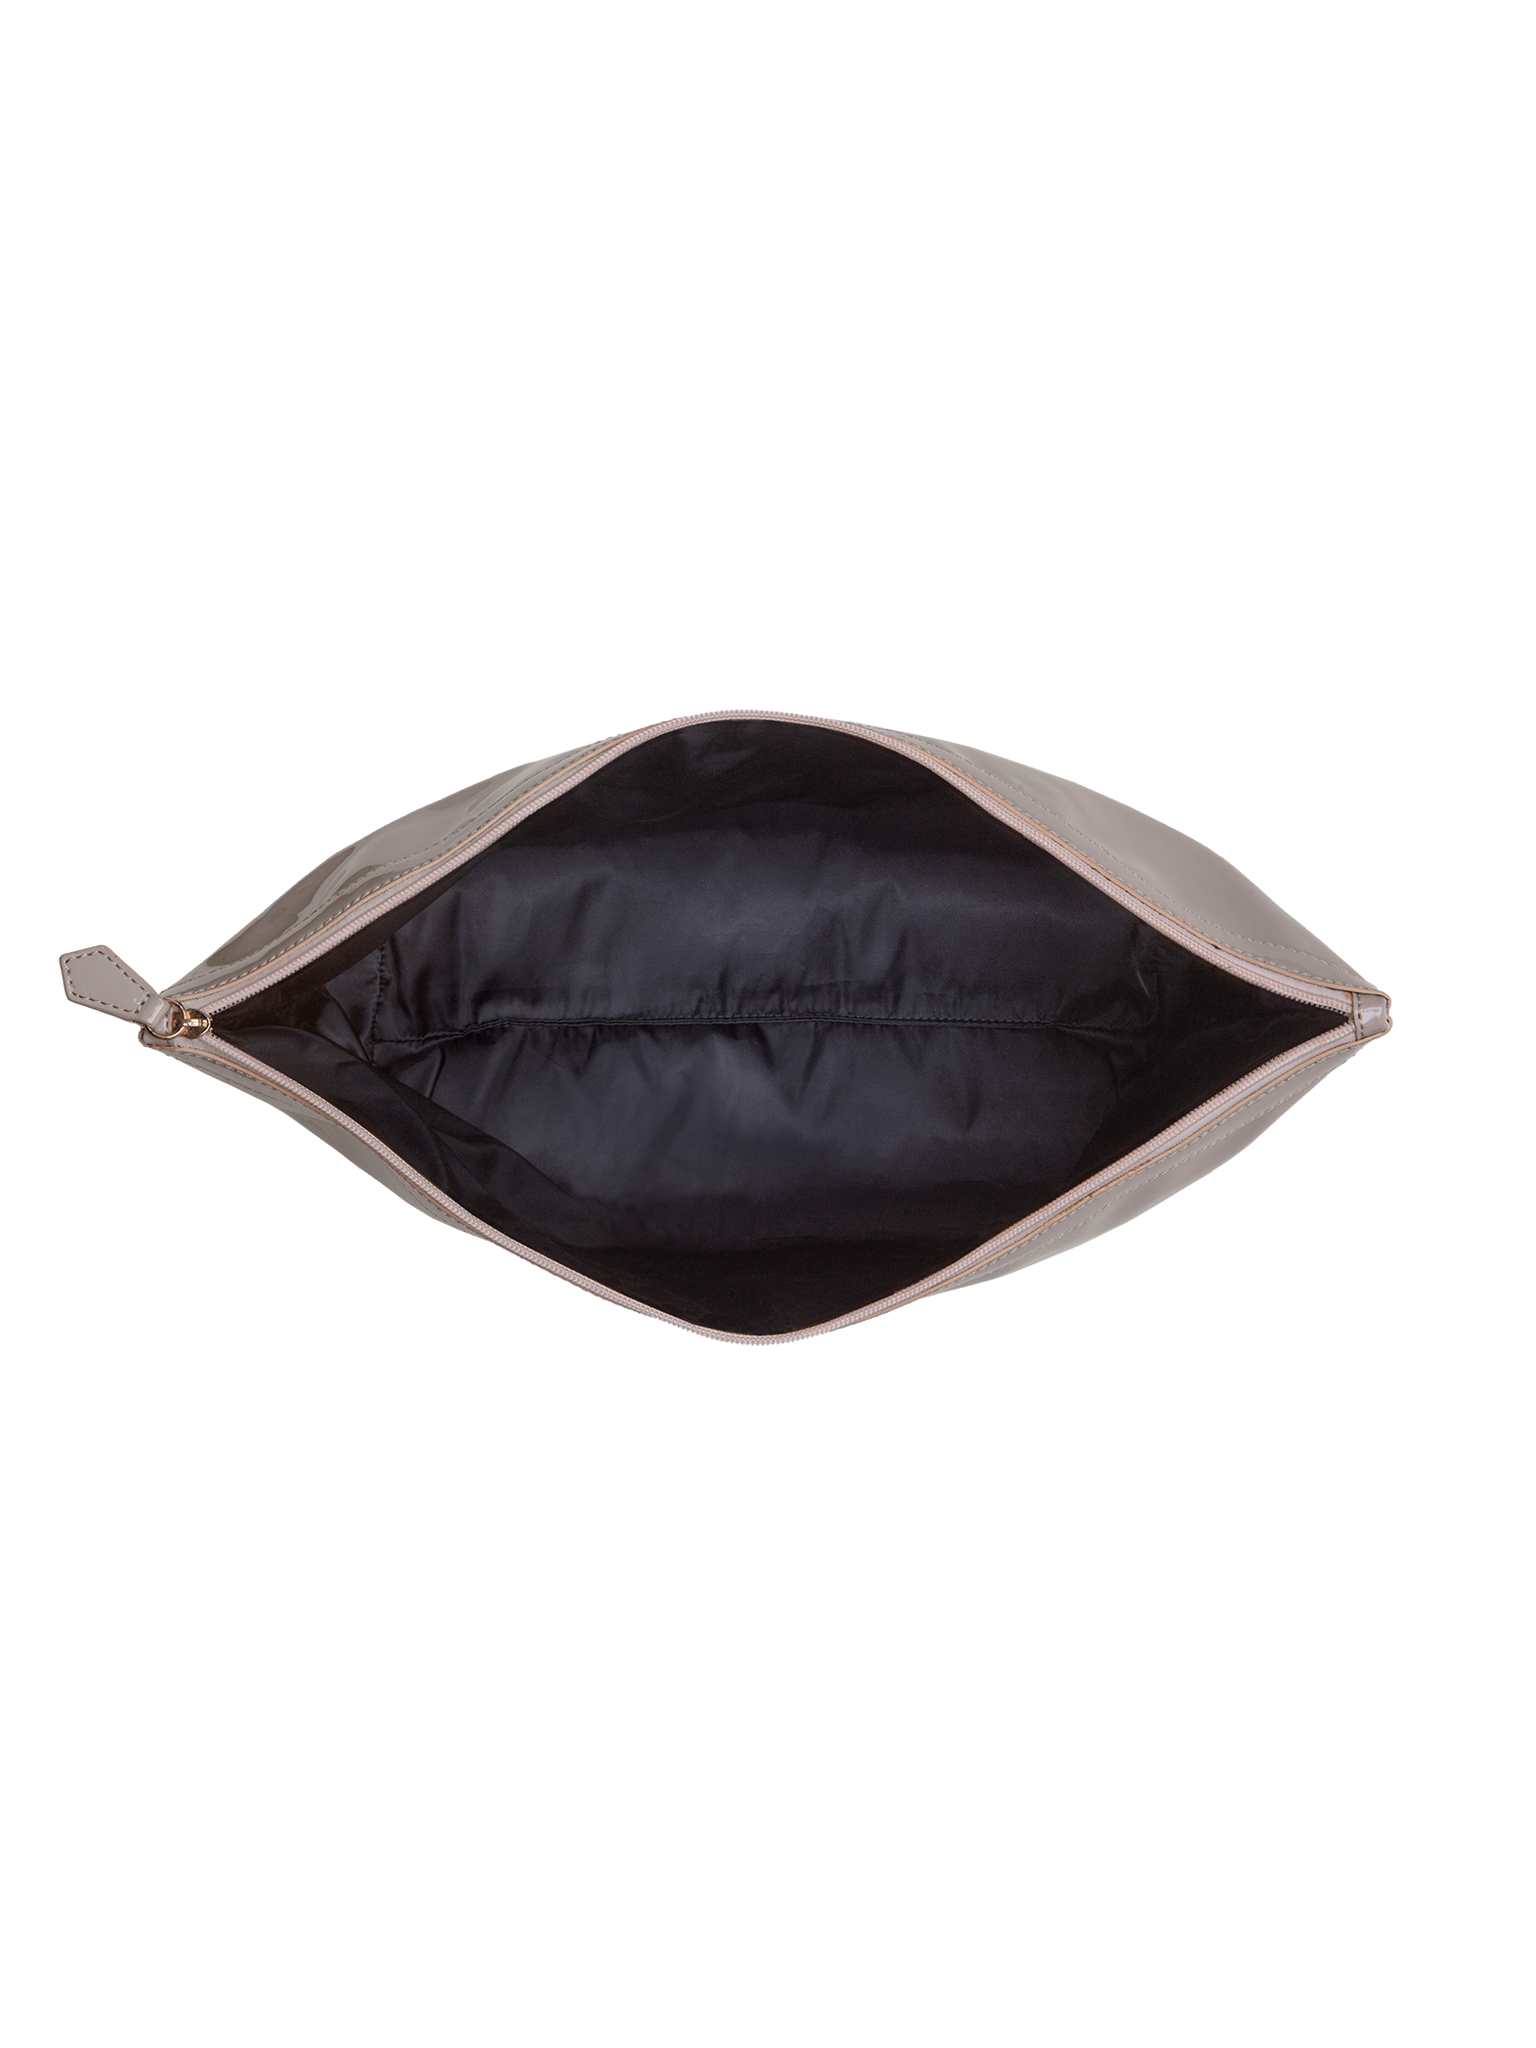 Designed with water resistant material, keep your items protected from the sun, sea and sand inside the large vegan leather pouch. 